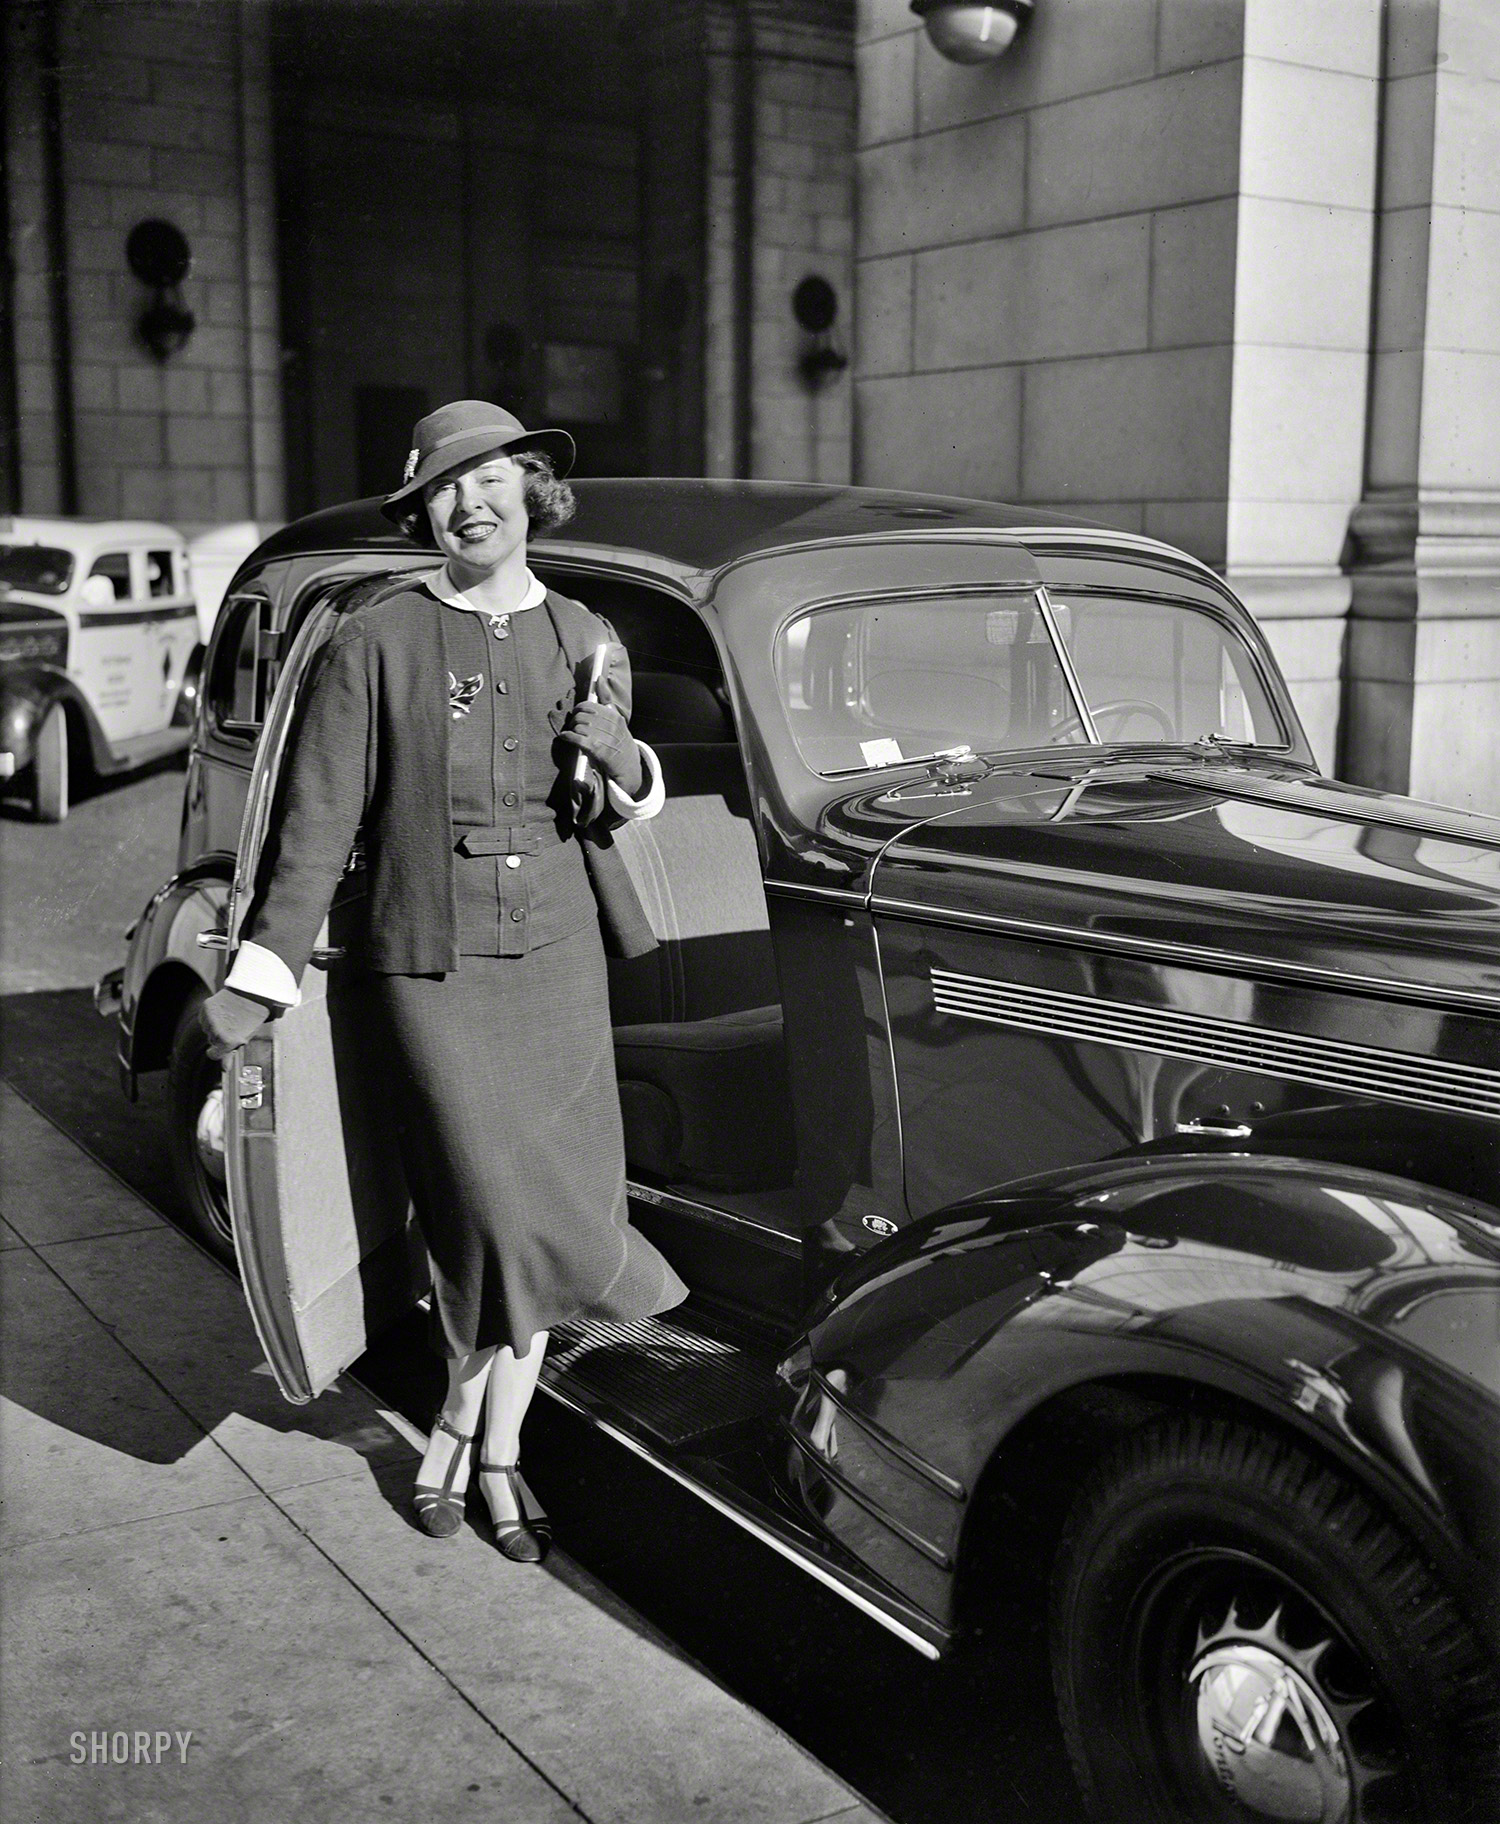 Washington, D.C., 1935. "NO CAPTION." Yet another nameless notable whose fame did not outlast her photo, and a reminder that, after we take that big black train from Union Station, 99.9 percent of us will eventually be completely and utterly forgotten. Harris & Ewing glass negative. View full size.